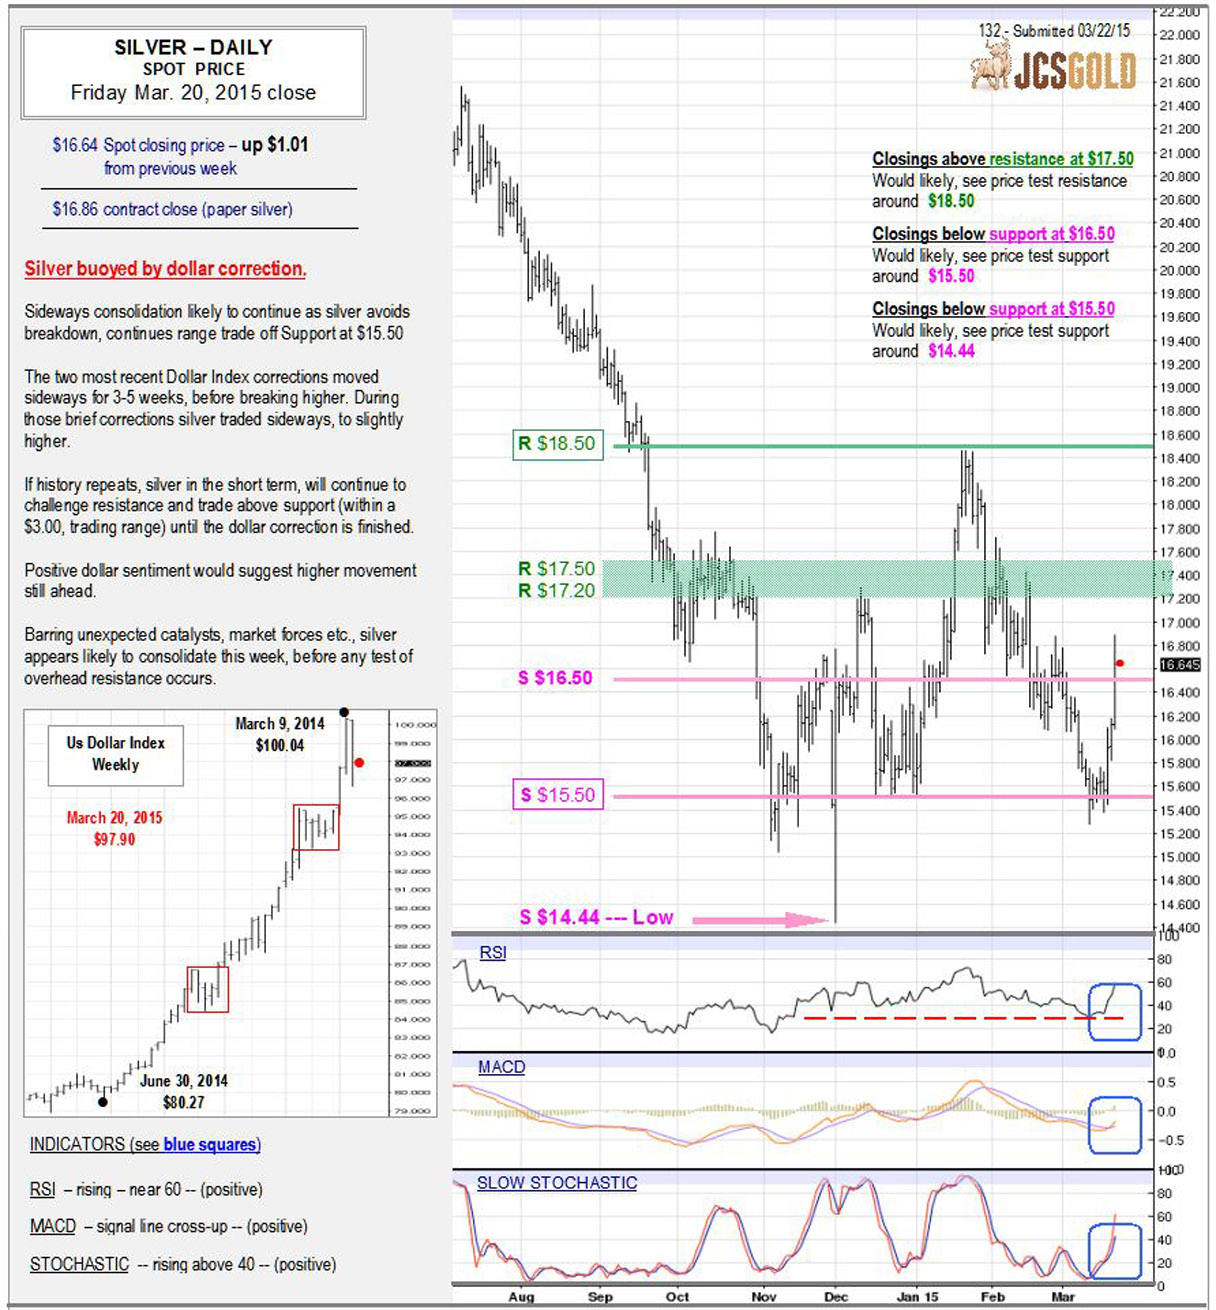 Mar 20, 2015 chart & commentary